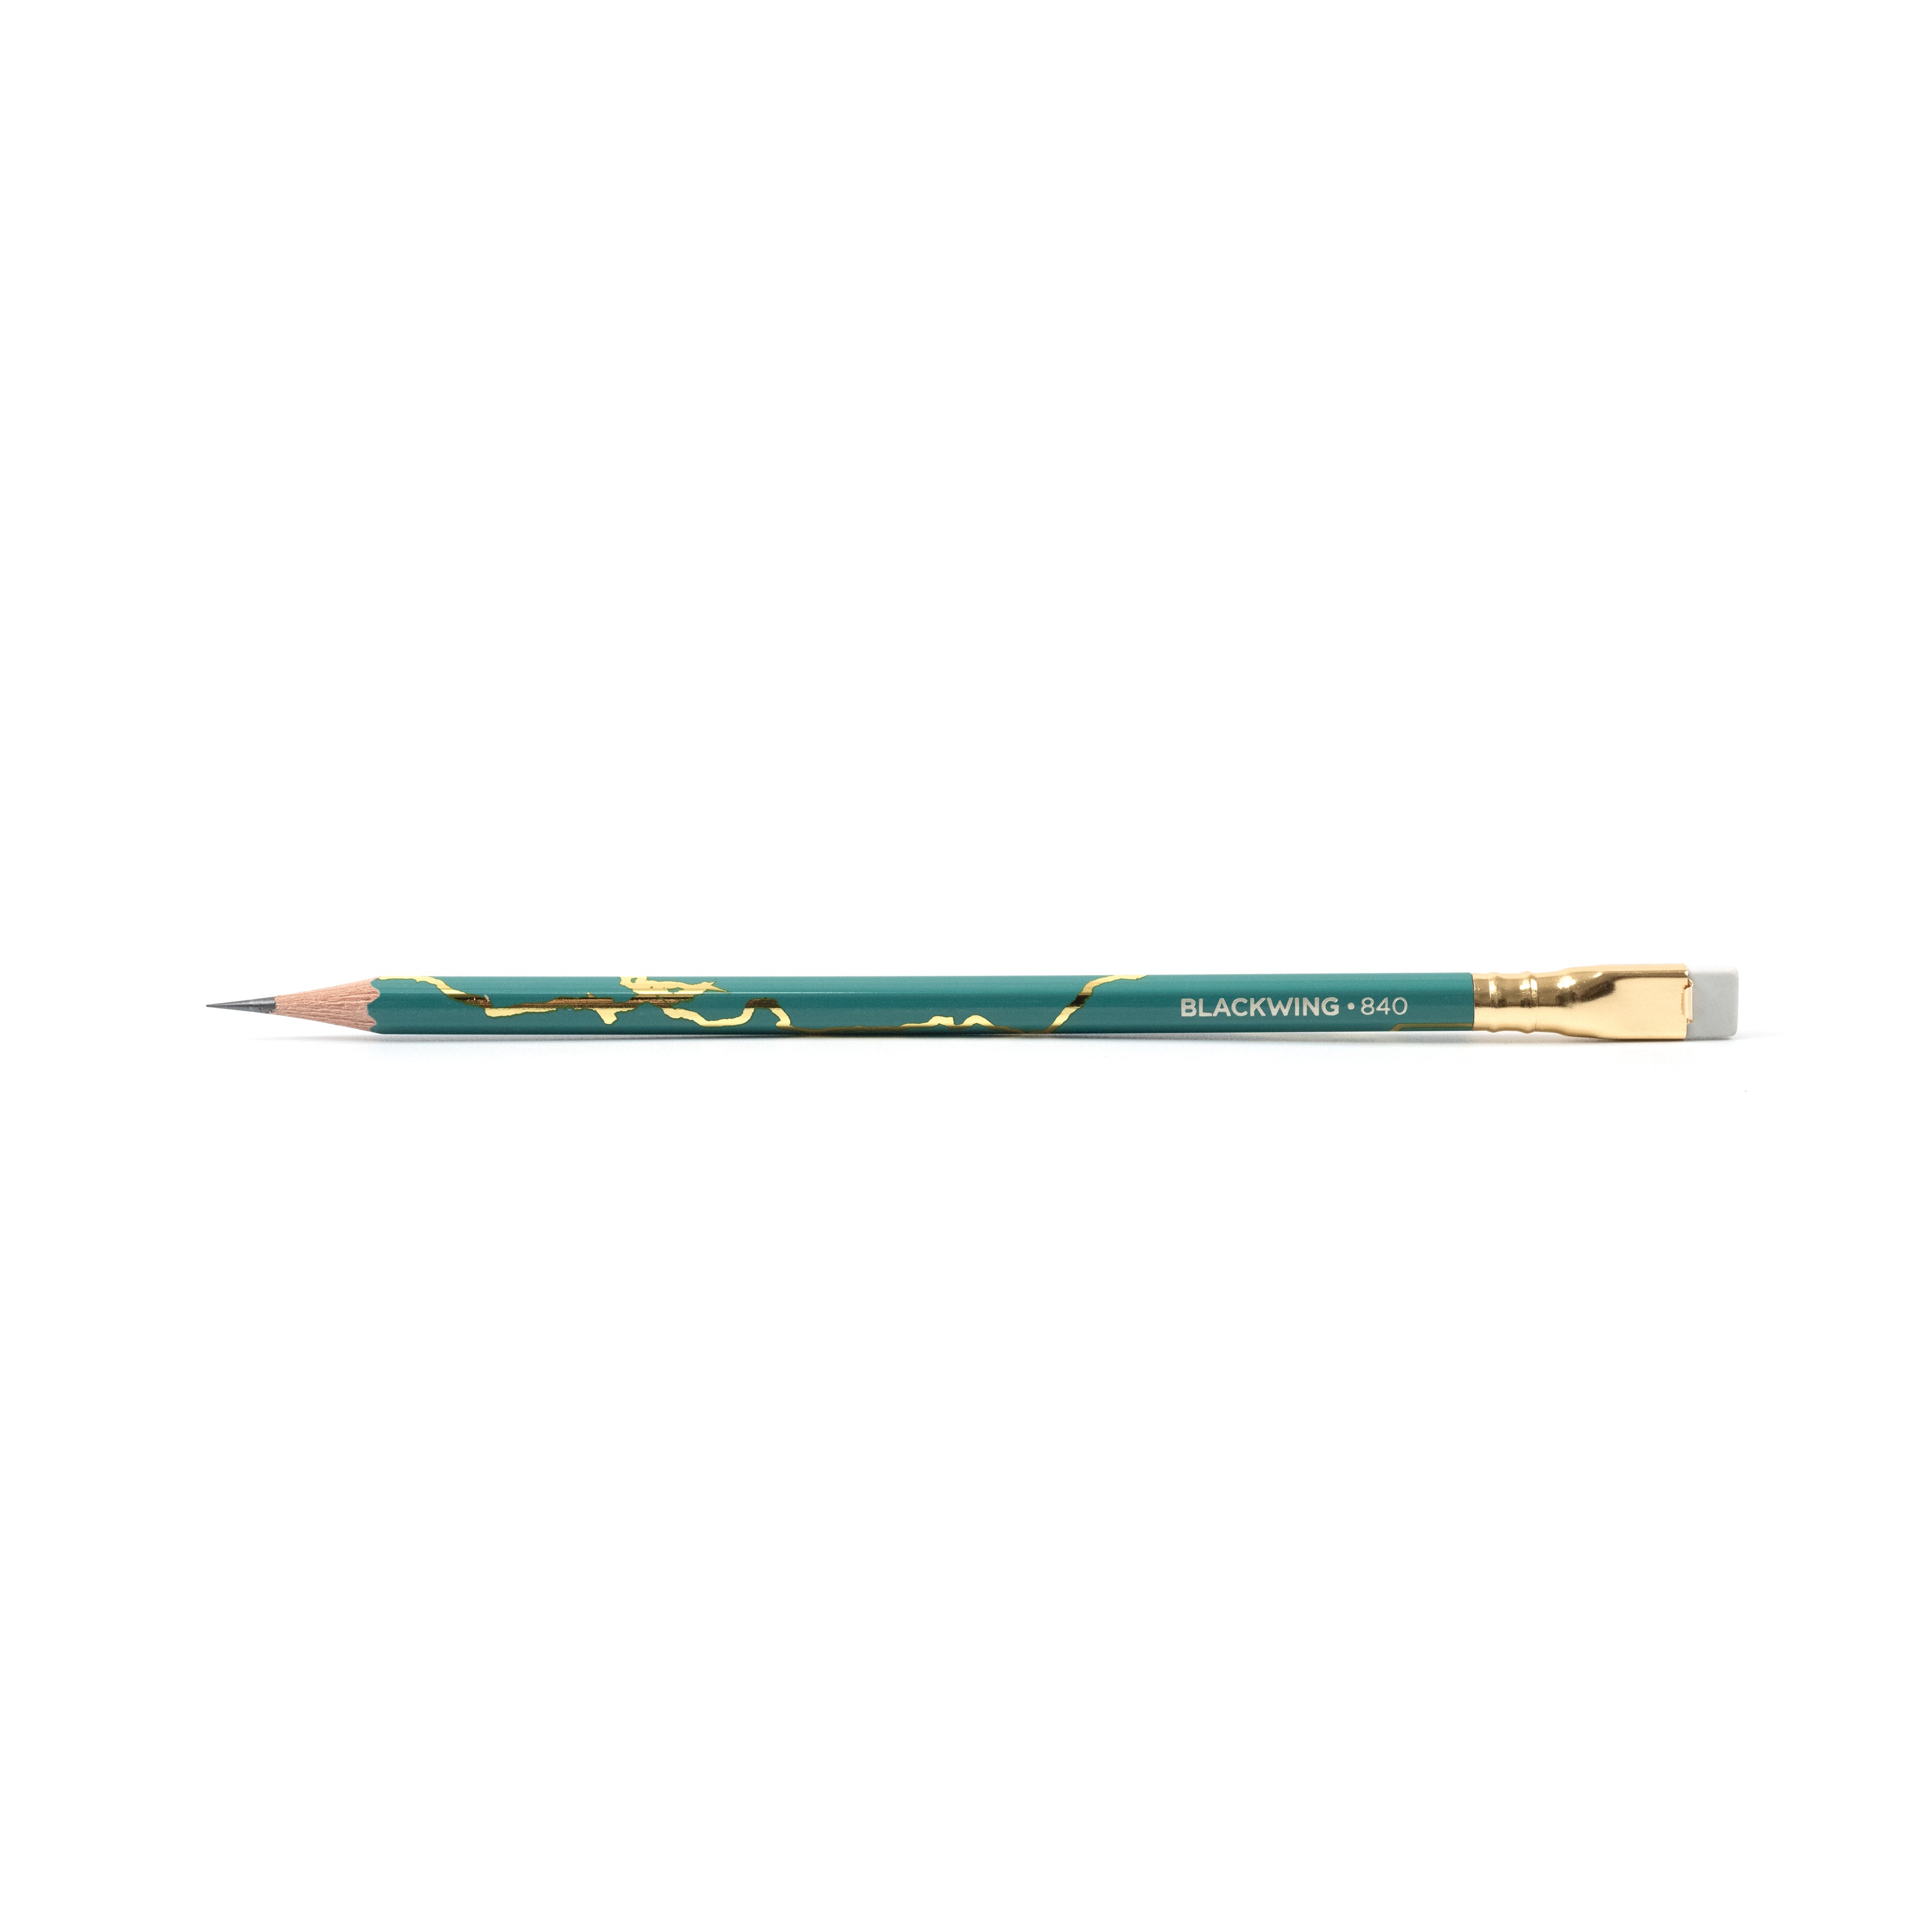 A Blackwing Volume 840 (Set of 12) with gold trim reminiscent of Duke Kahanamoku surfing in California.